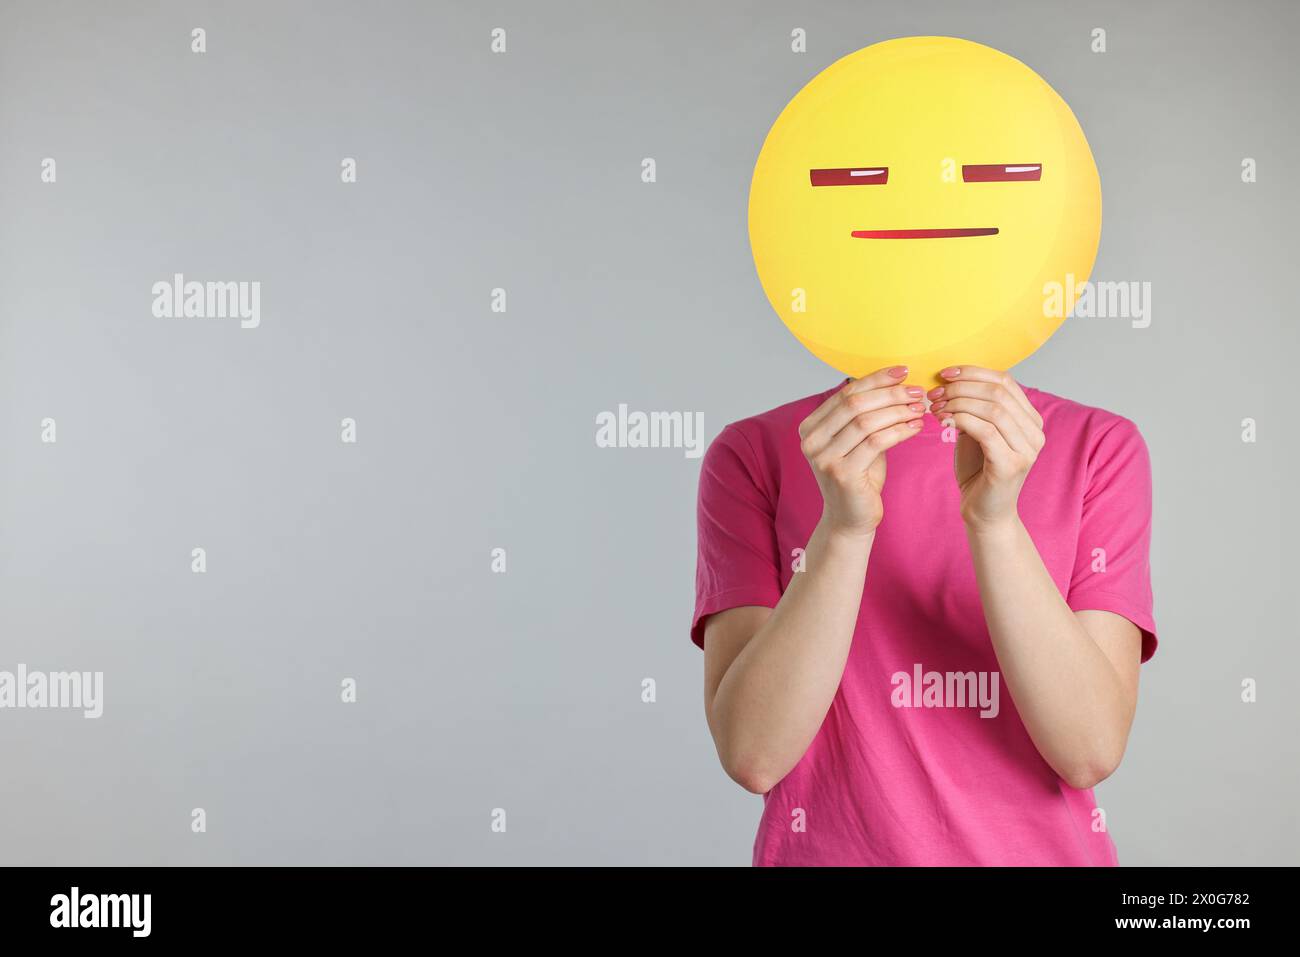 Woman holding emoticon with closed eyes and mouth on grey background. Space for text Stock Photo